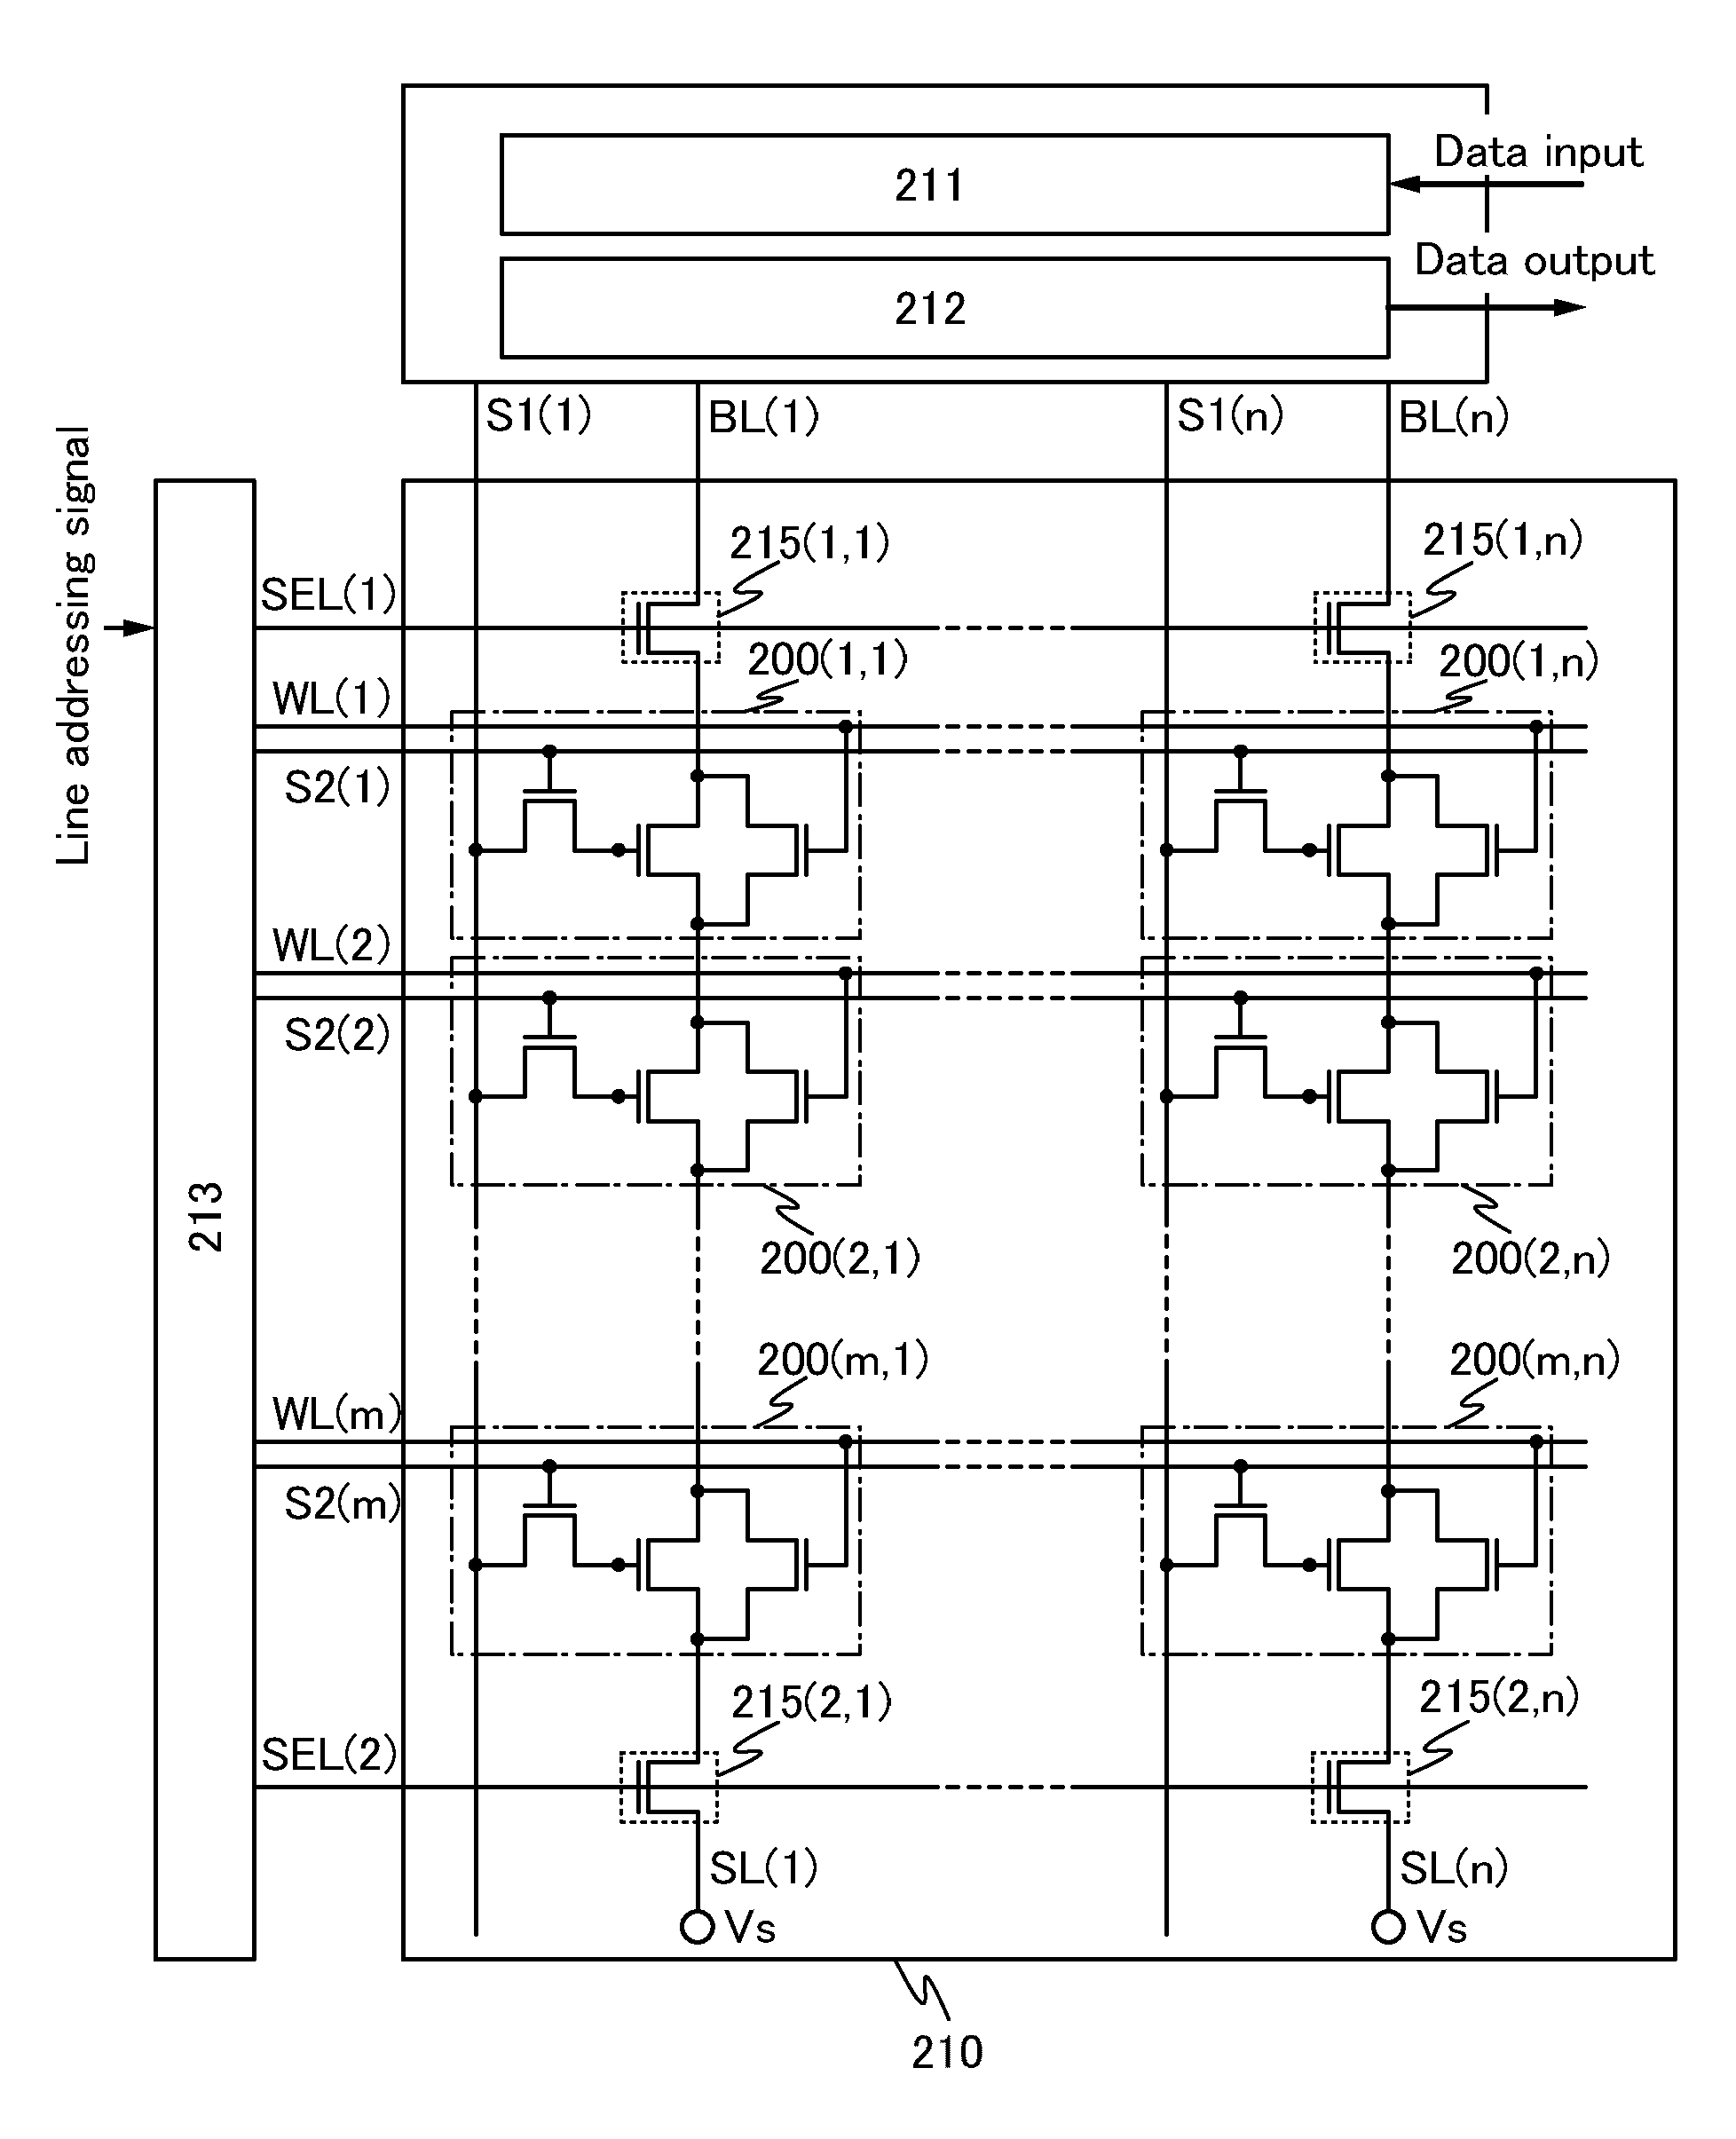 Oxide-based thin-film transistor (TFT) semiconductor memory device having source/drain electrode of one transistor connected to gate electrode of the other